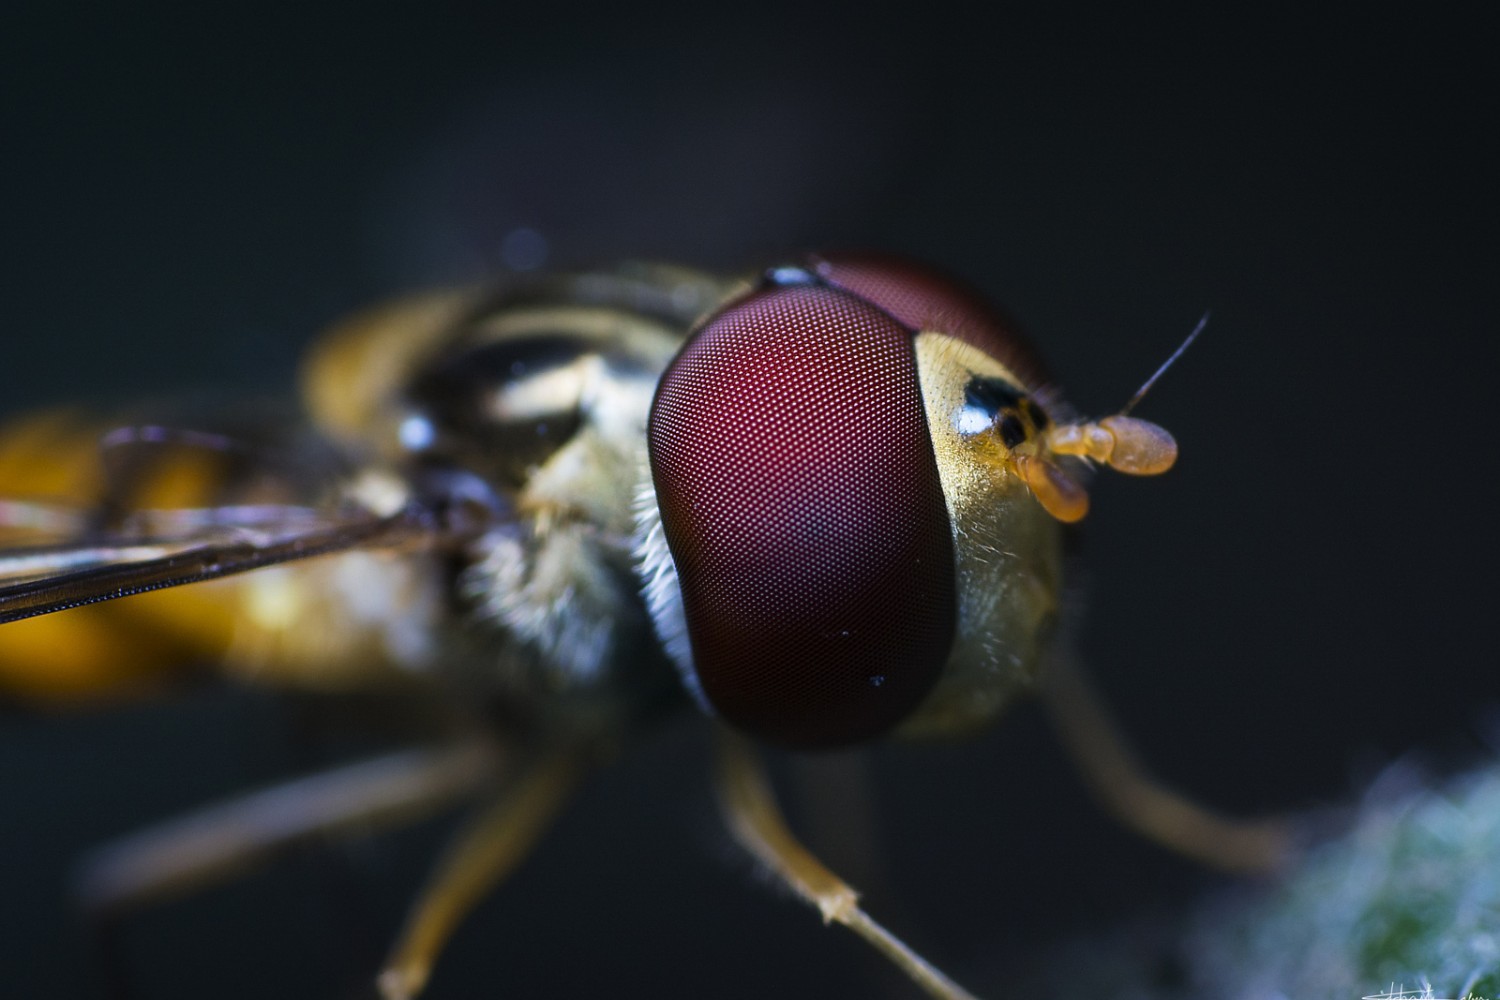 Amazing Macro Photos Shot by a 16-Year-Old in His Backyard